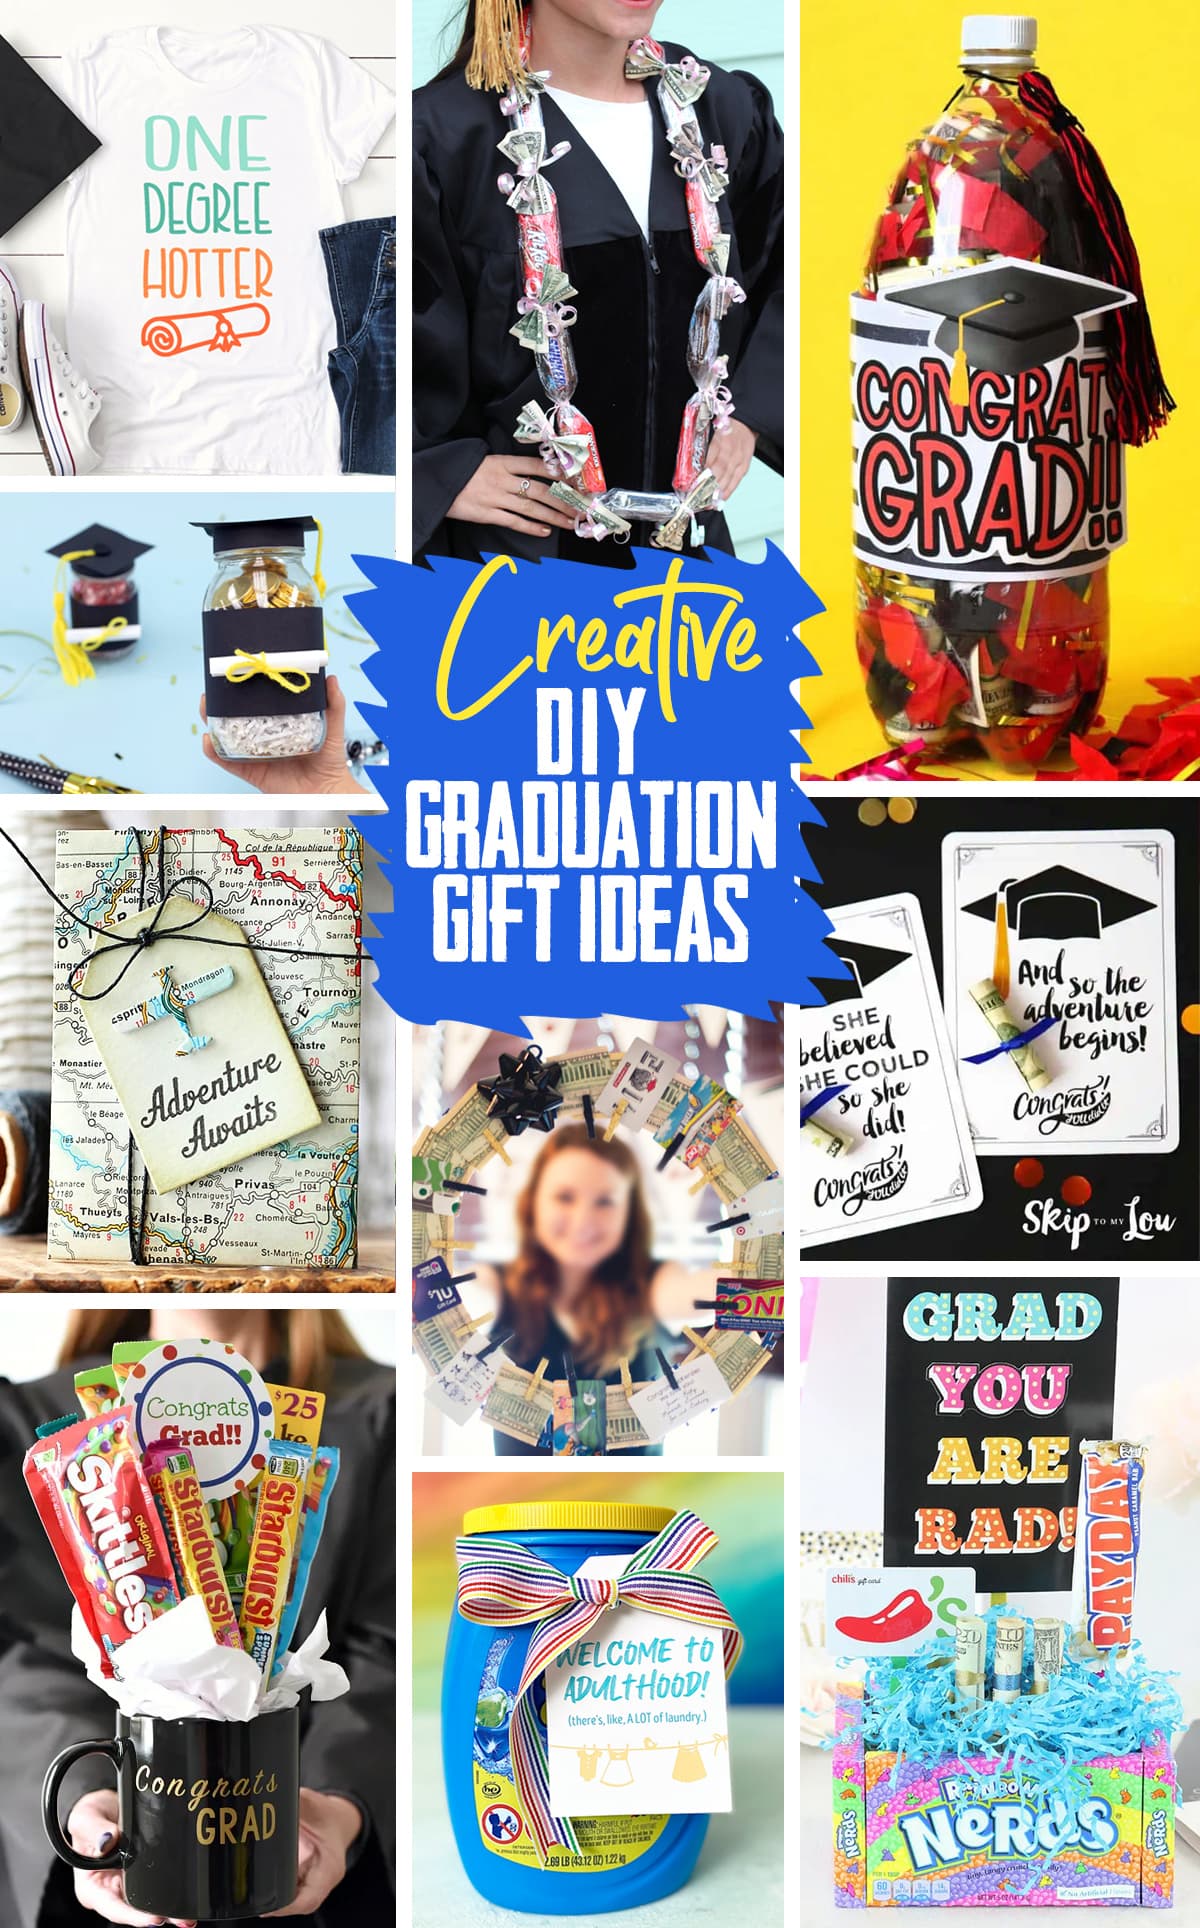 Best Graduation Gifts for Him - Grad Gift Ideas for 2023